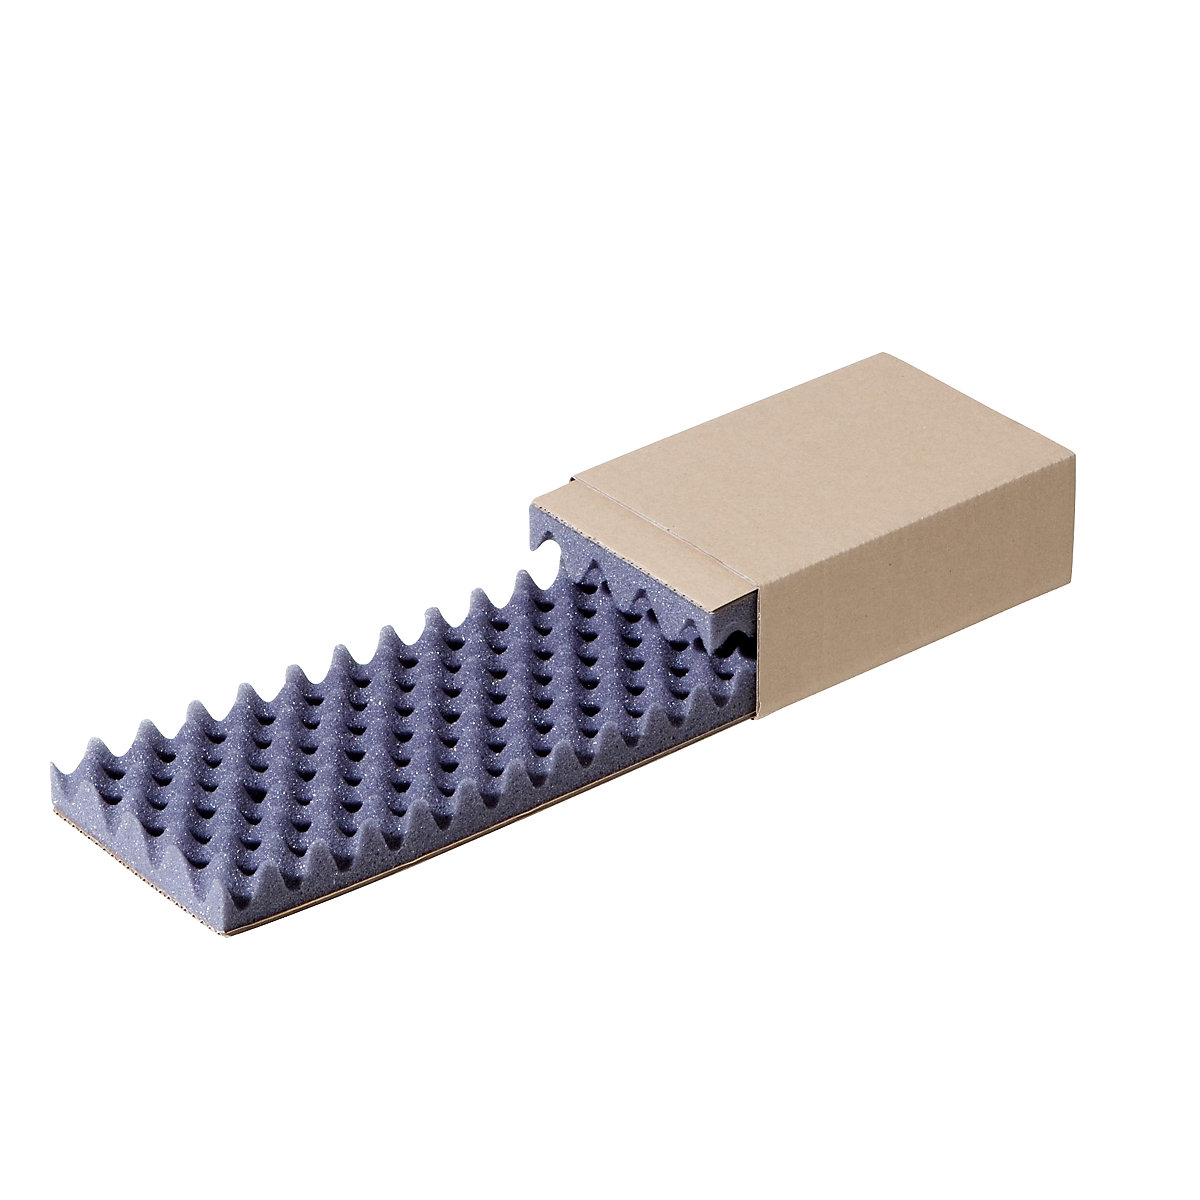 Slide boxes, internal part FEFCO 0907, external part FEFCO 0503, padded, internal dimensions 210 x 140 x 65 mm, pack of 100-3